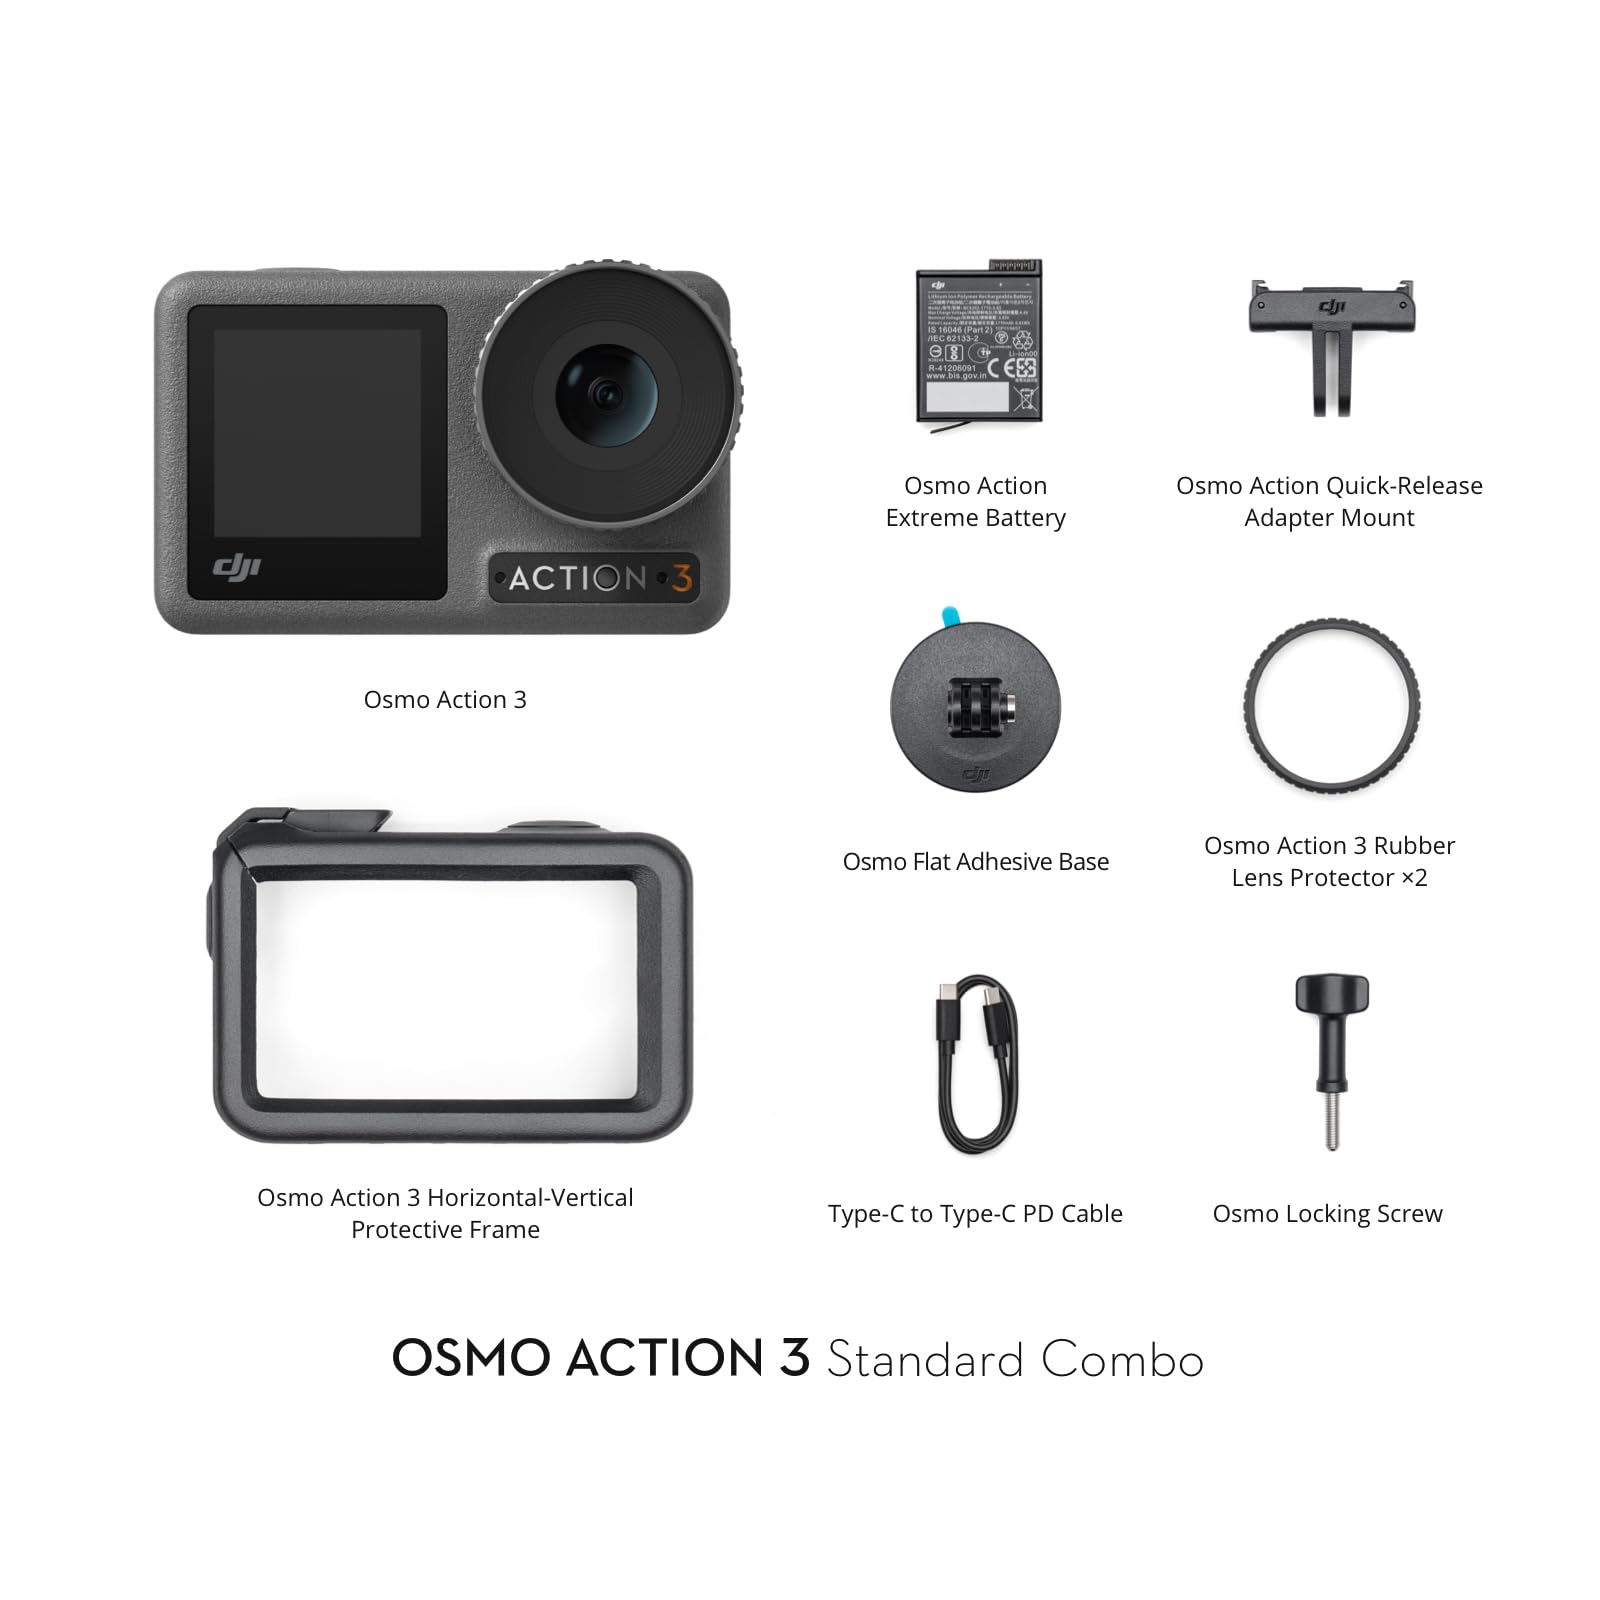 DJI Osmo Action 3 Standard Combo, Waterproof Action Camera with 4K HDR & Super-Wide FOV, 10-Bit Color Depth, HorizonSteady, Cold Resistant & Long-Lasting, Vlogging Camera for YouTube